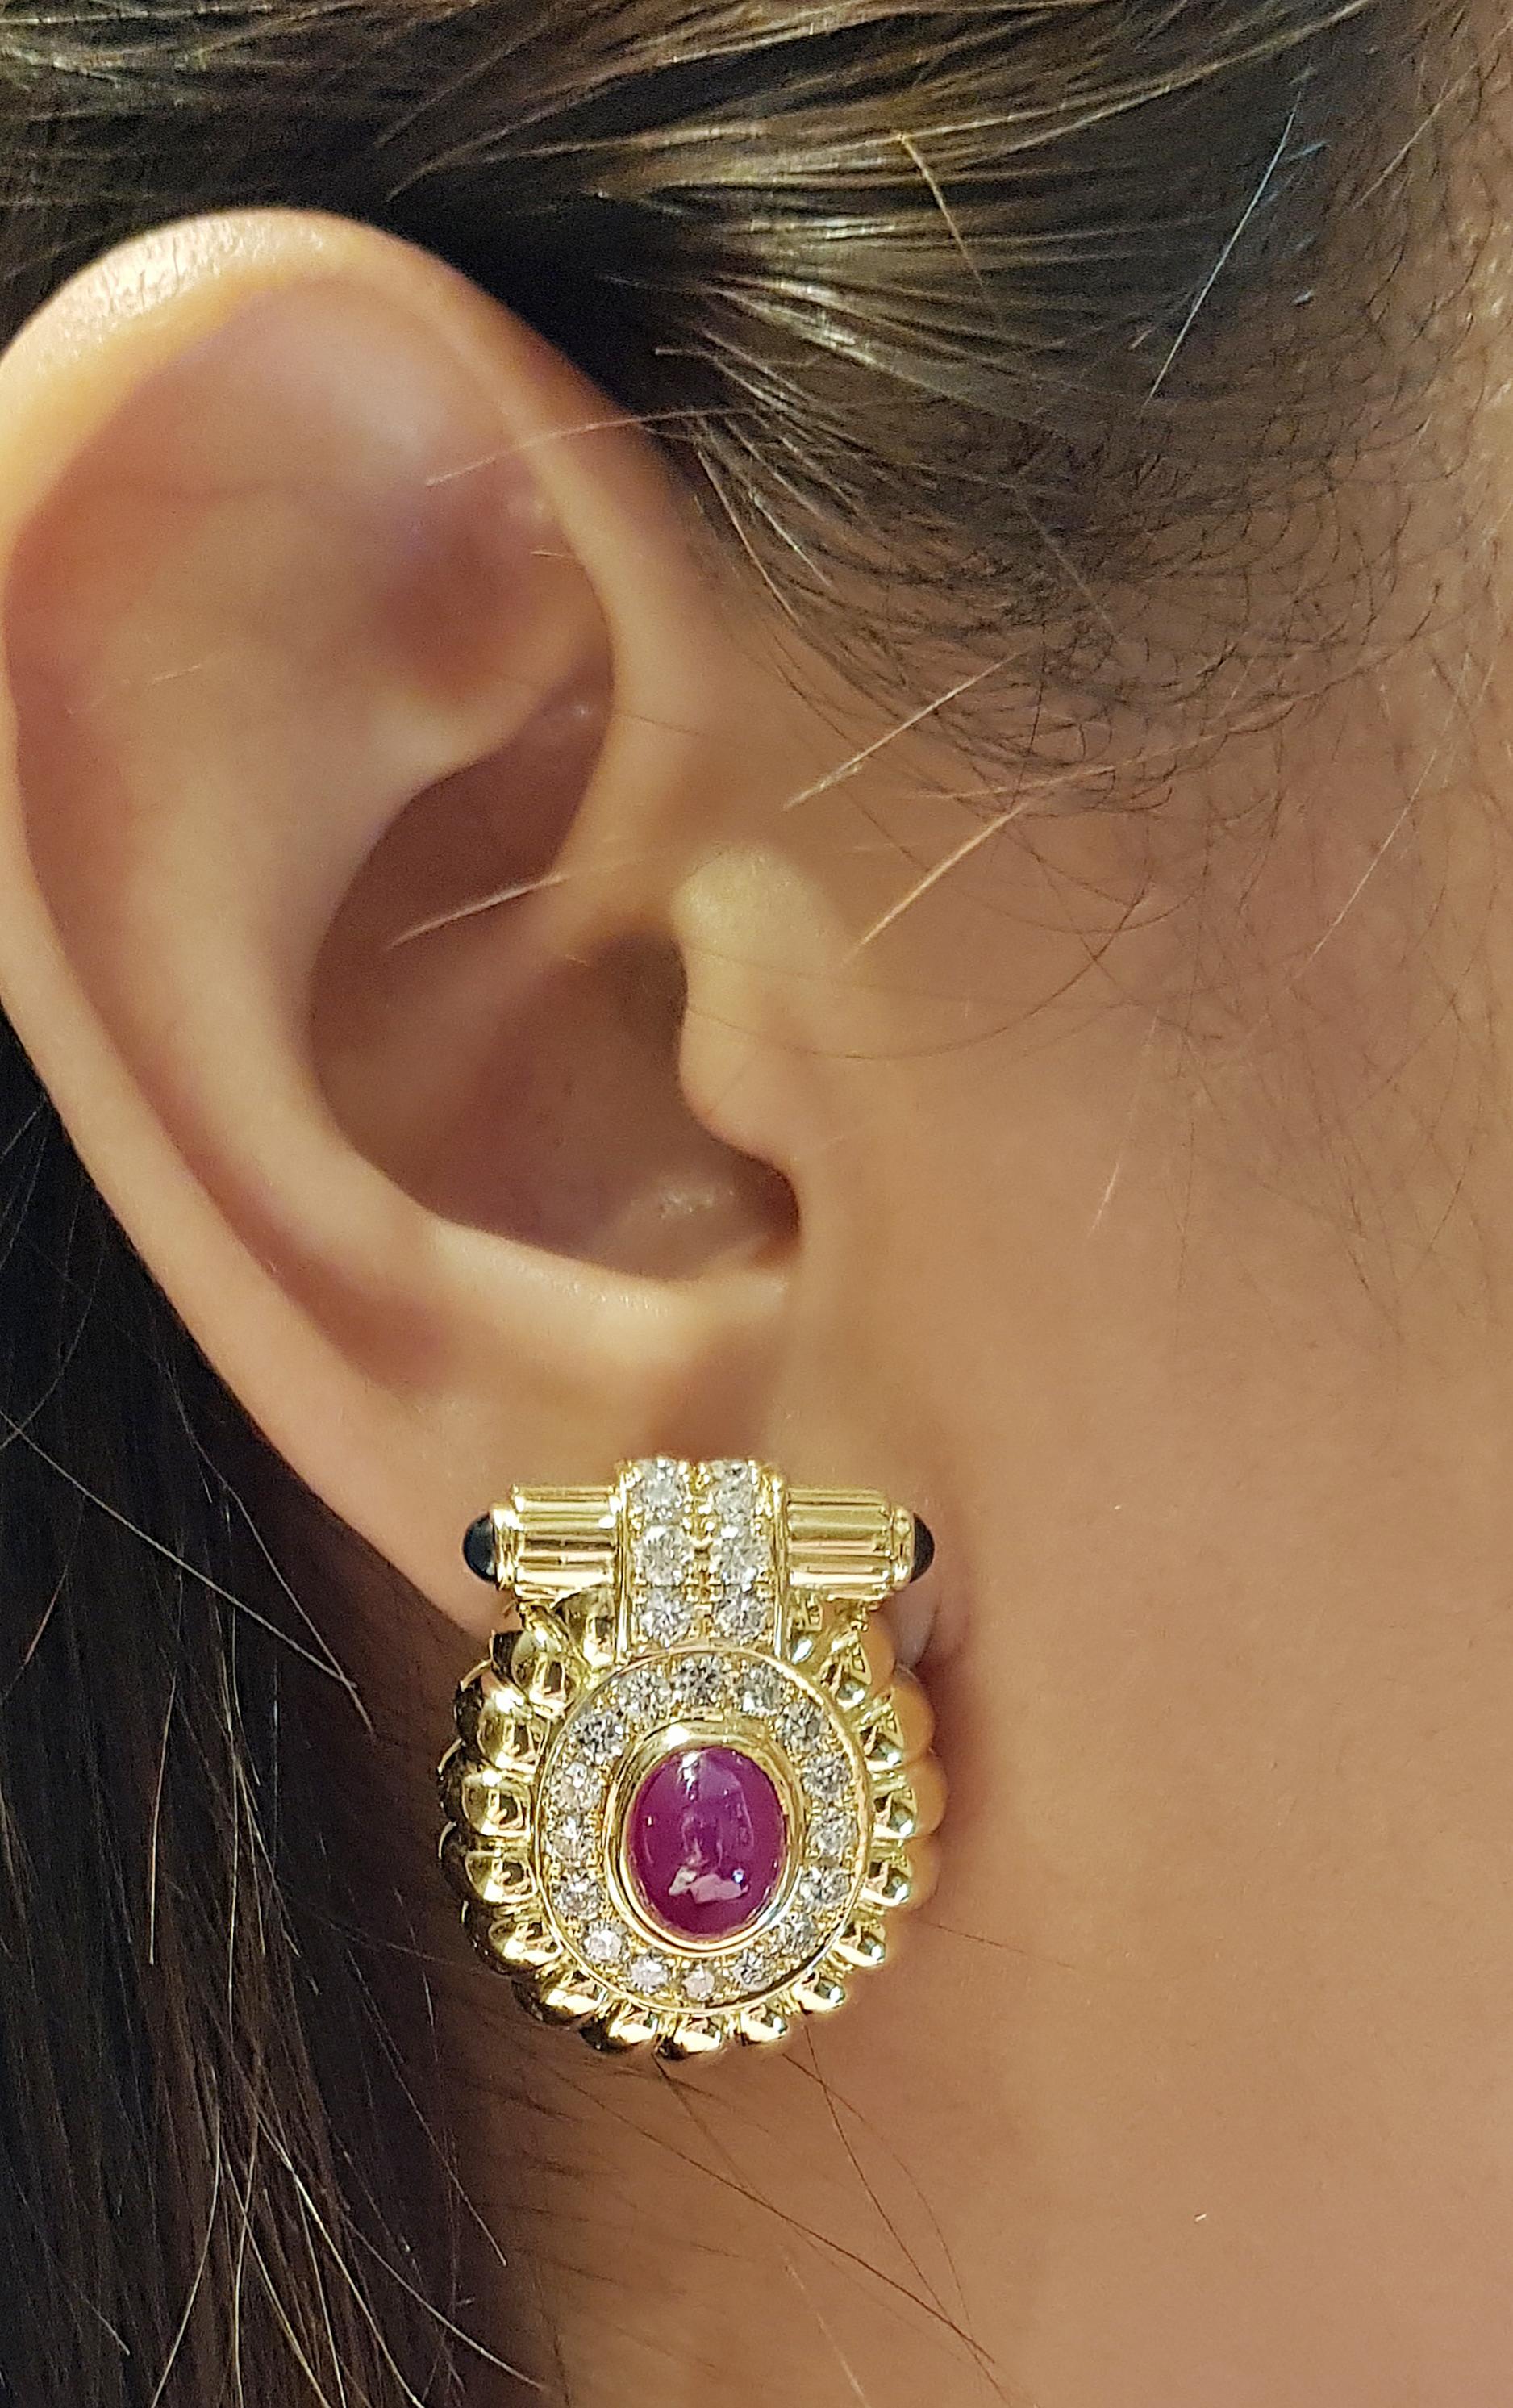 Cabochon Ruby 5.76 carats with Diamond 2.03 carats and Cabochon Blue Sapphire 0.83 carat Earrings set in 18 Karat Gold Settings

Width:  2.3 cm 
Length: 2.7 cm
Total Weight: 23.04 grams

